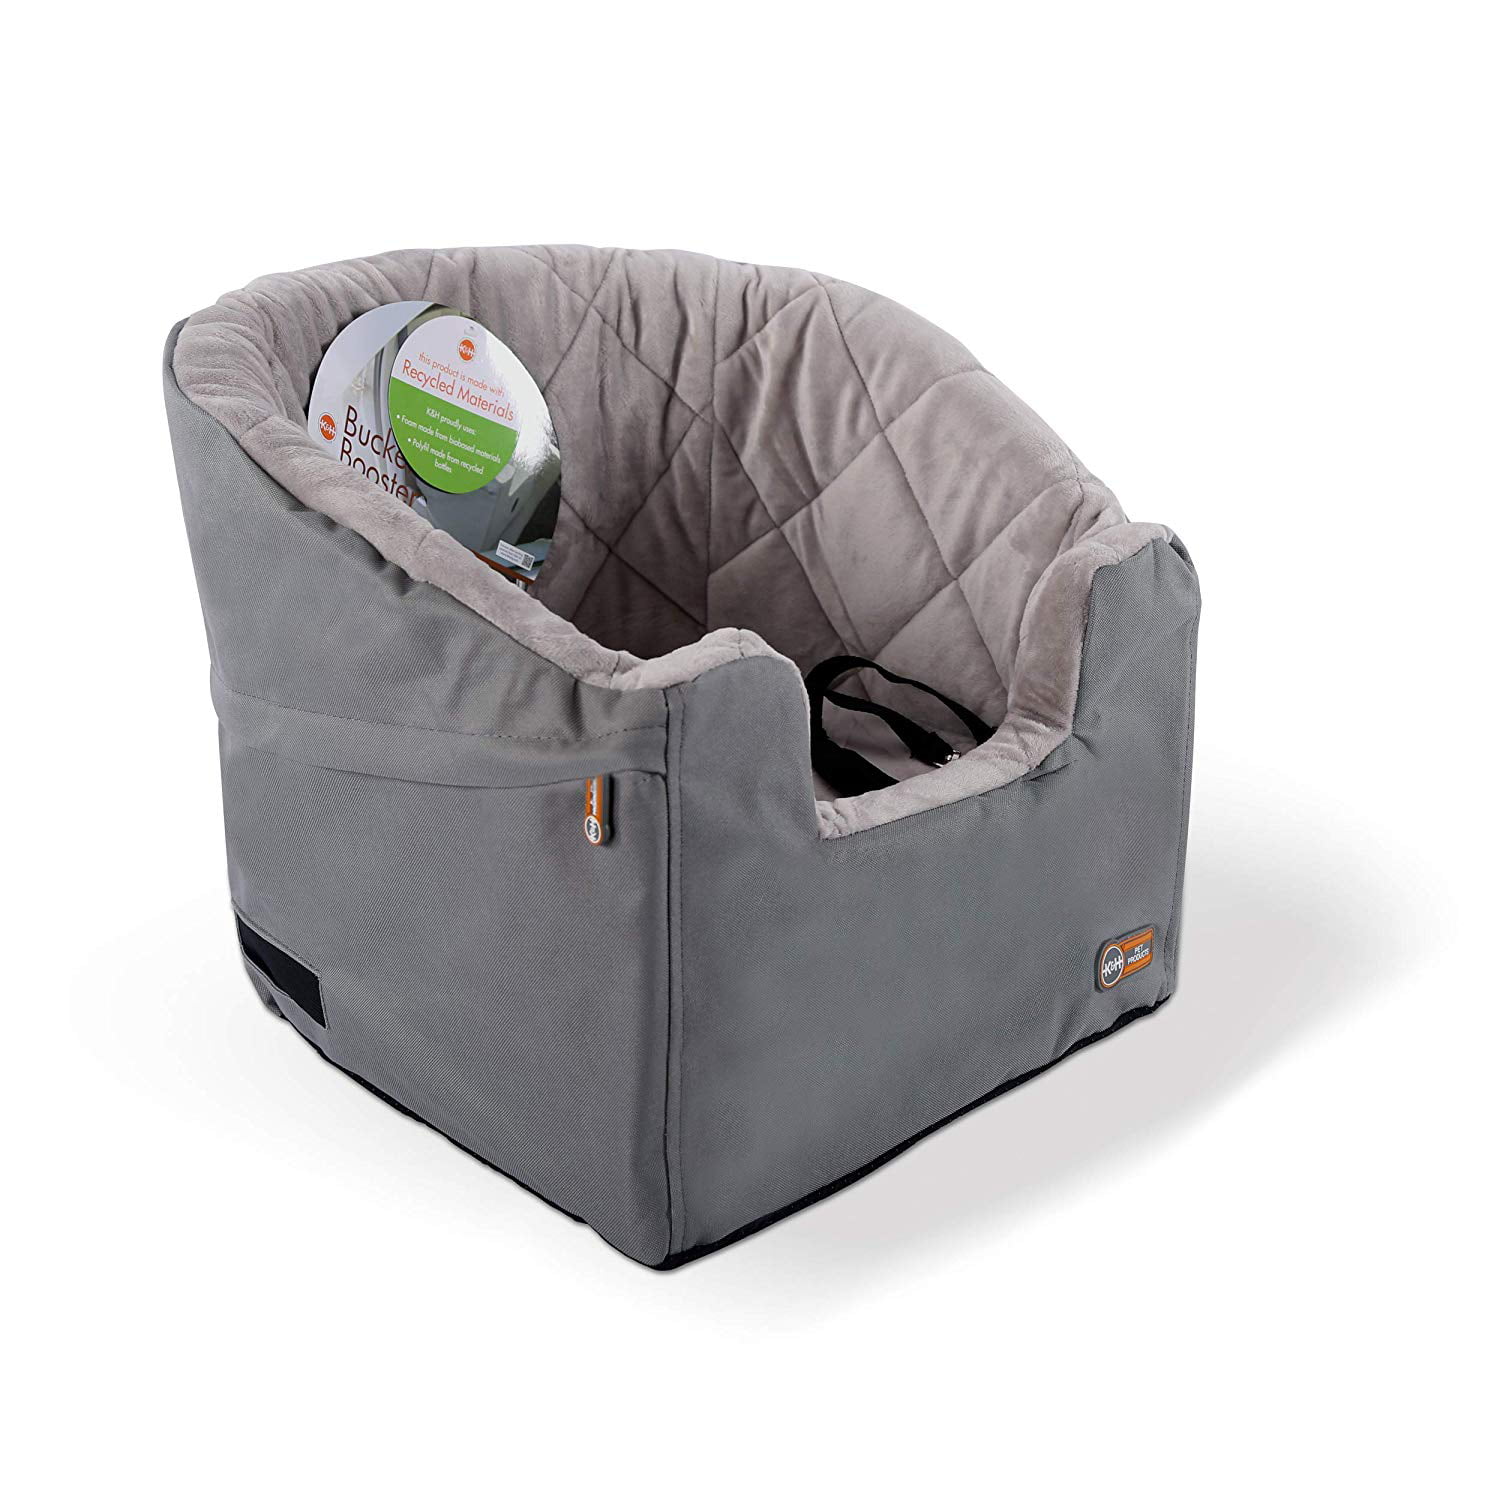 Photo 1 of K&H Pet Products Bucket Booster Pet Seat, Grey, Small